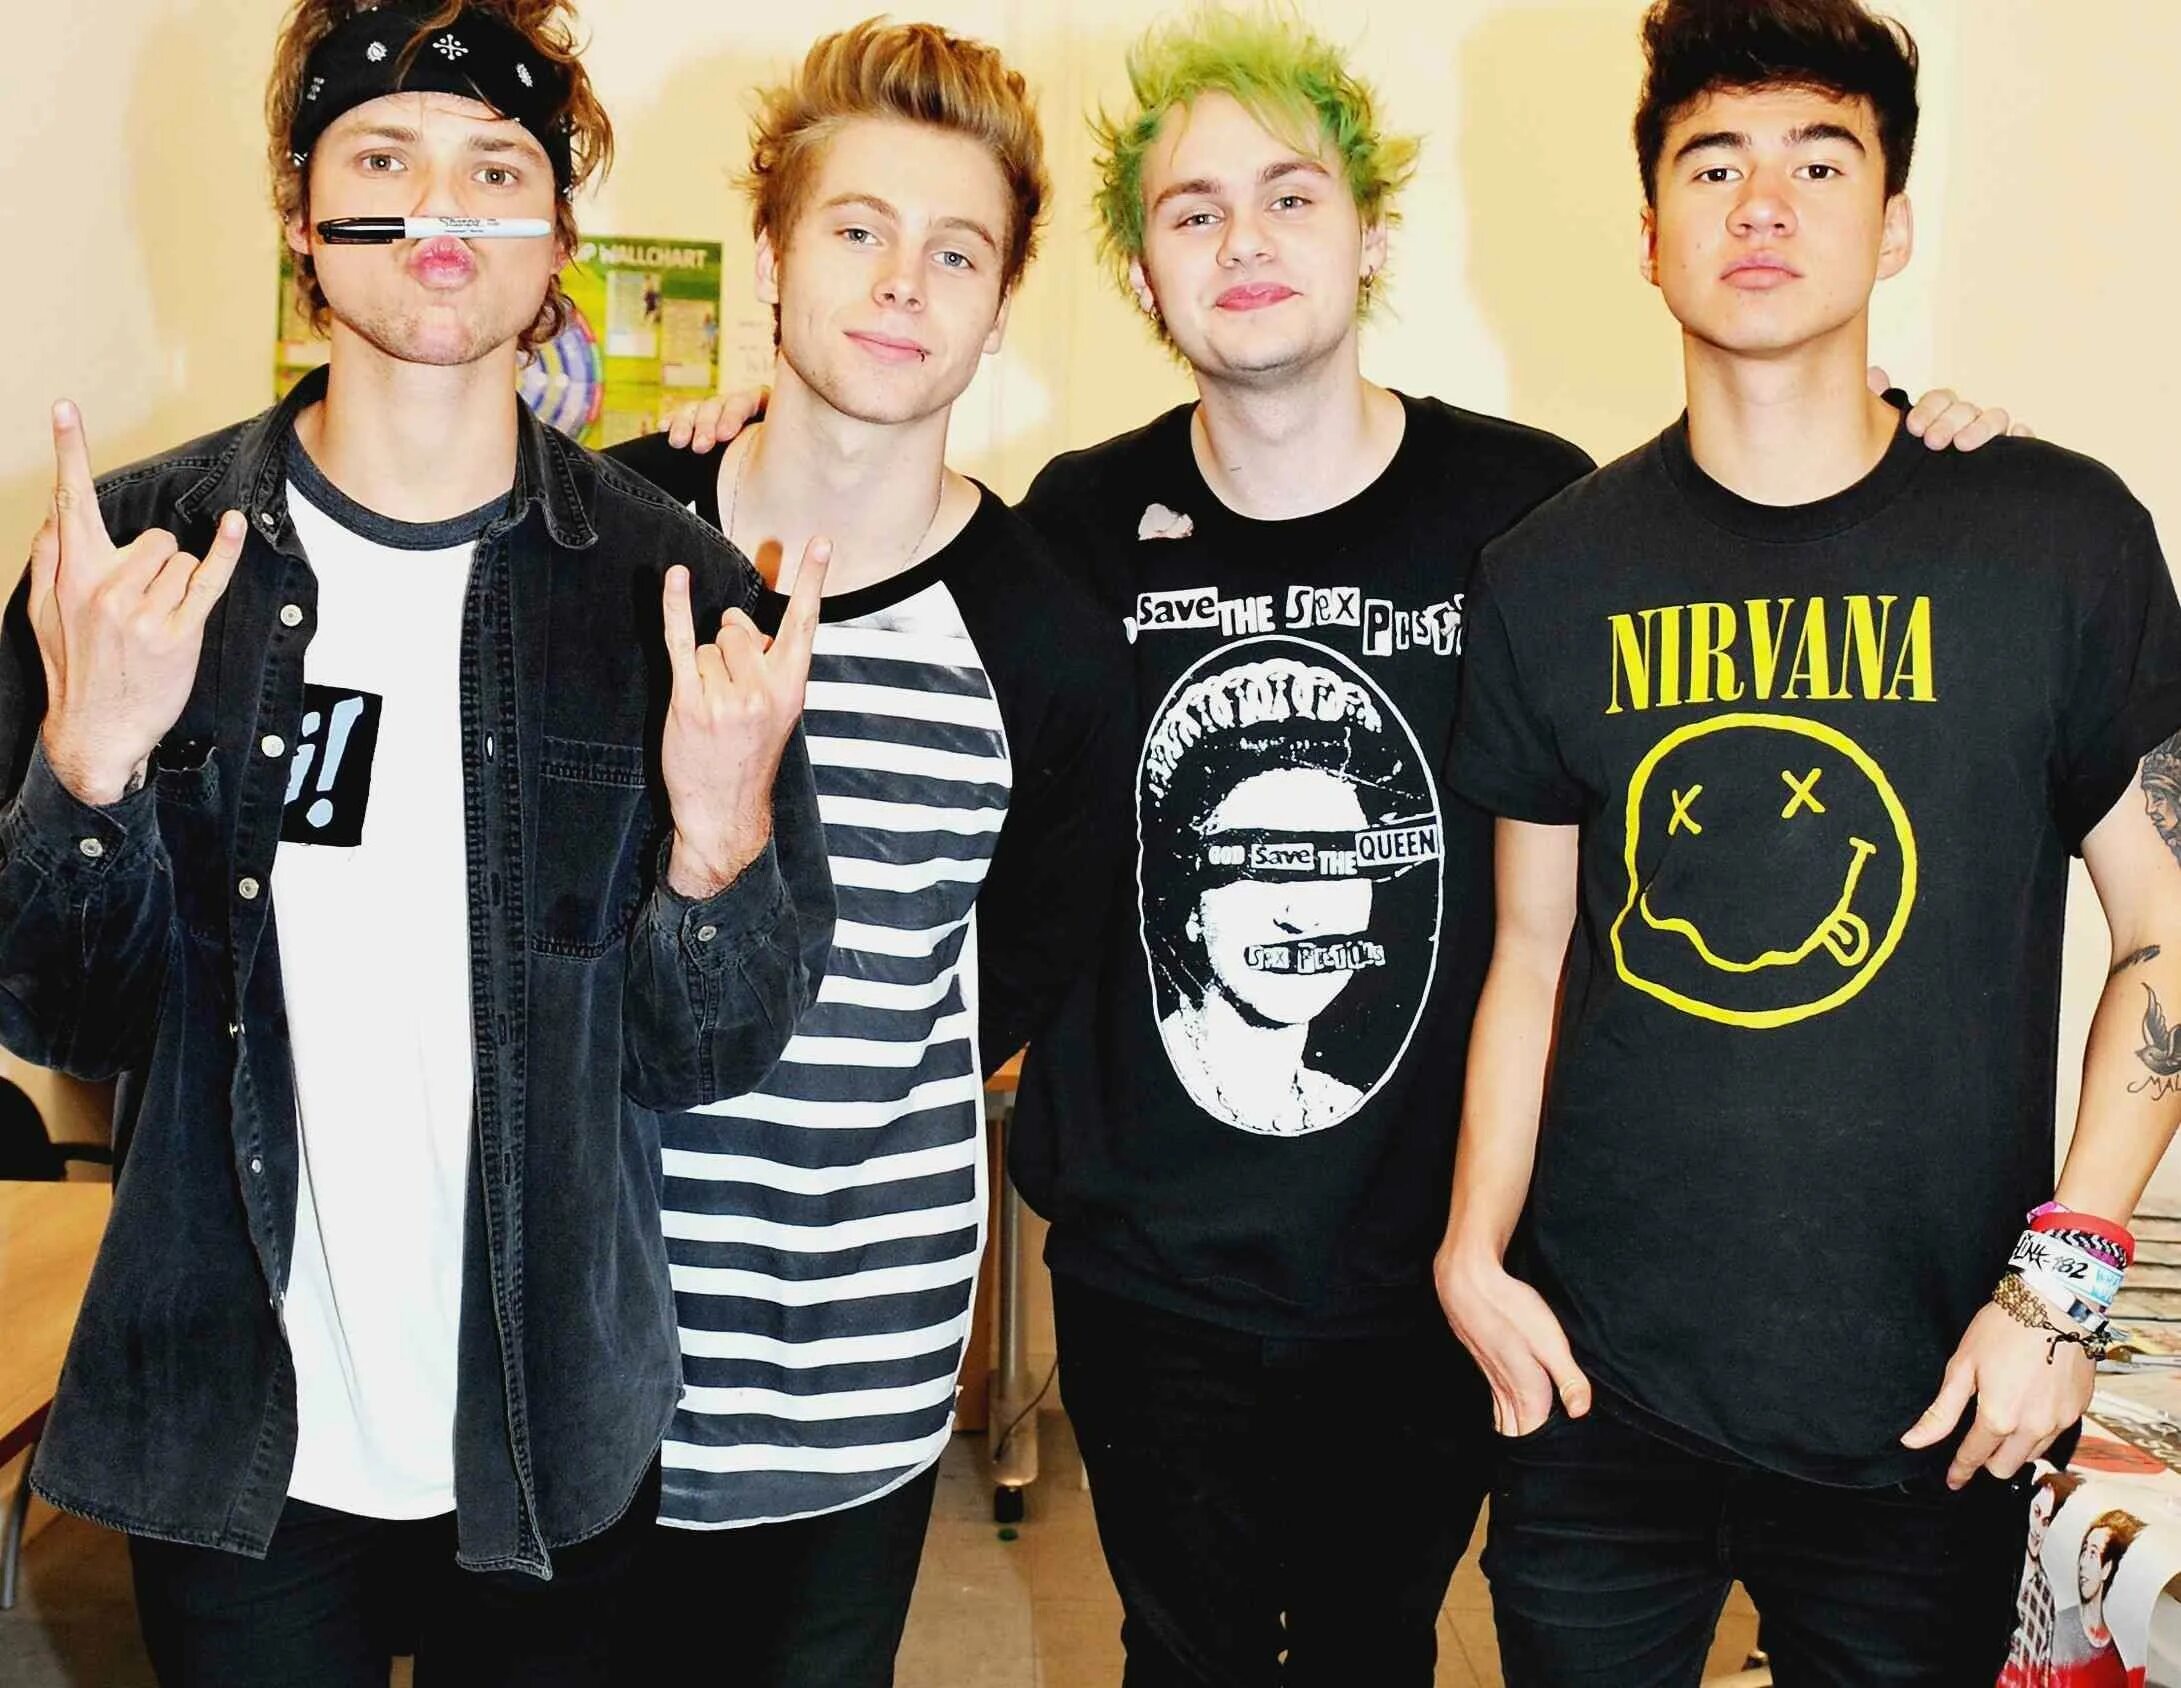 5 Seconds of Summer. 5sos участники. Группа 5 seconds of Summer участники. Каллум 5sos. My second year